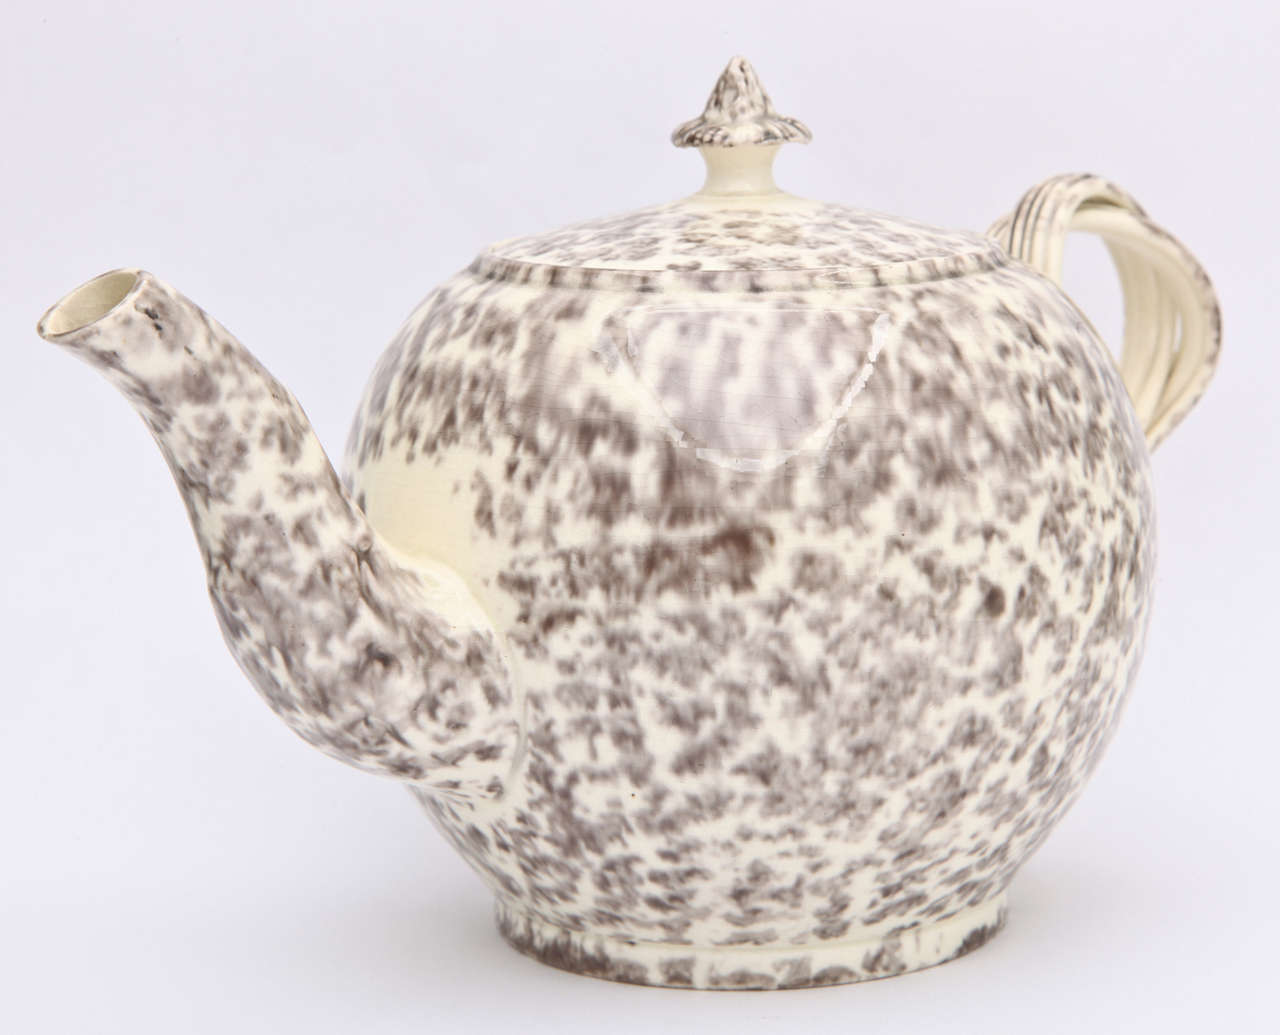 A rare and fine English creamware pottery teapot with flower knop and double strap handles and decorated in gray tortoise glazes